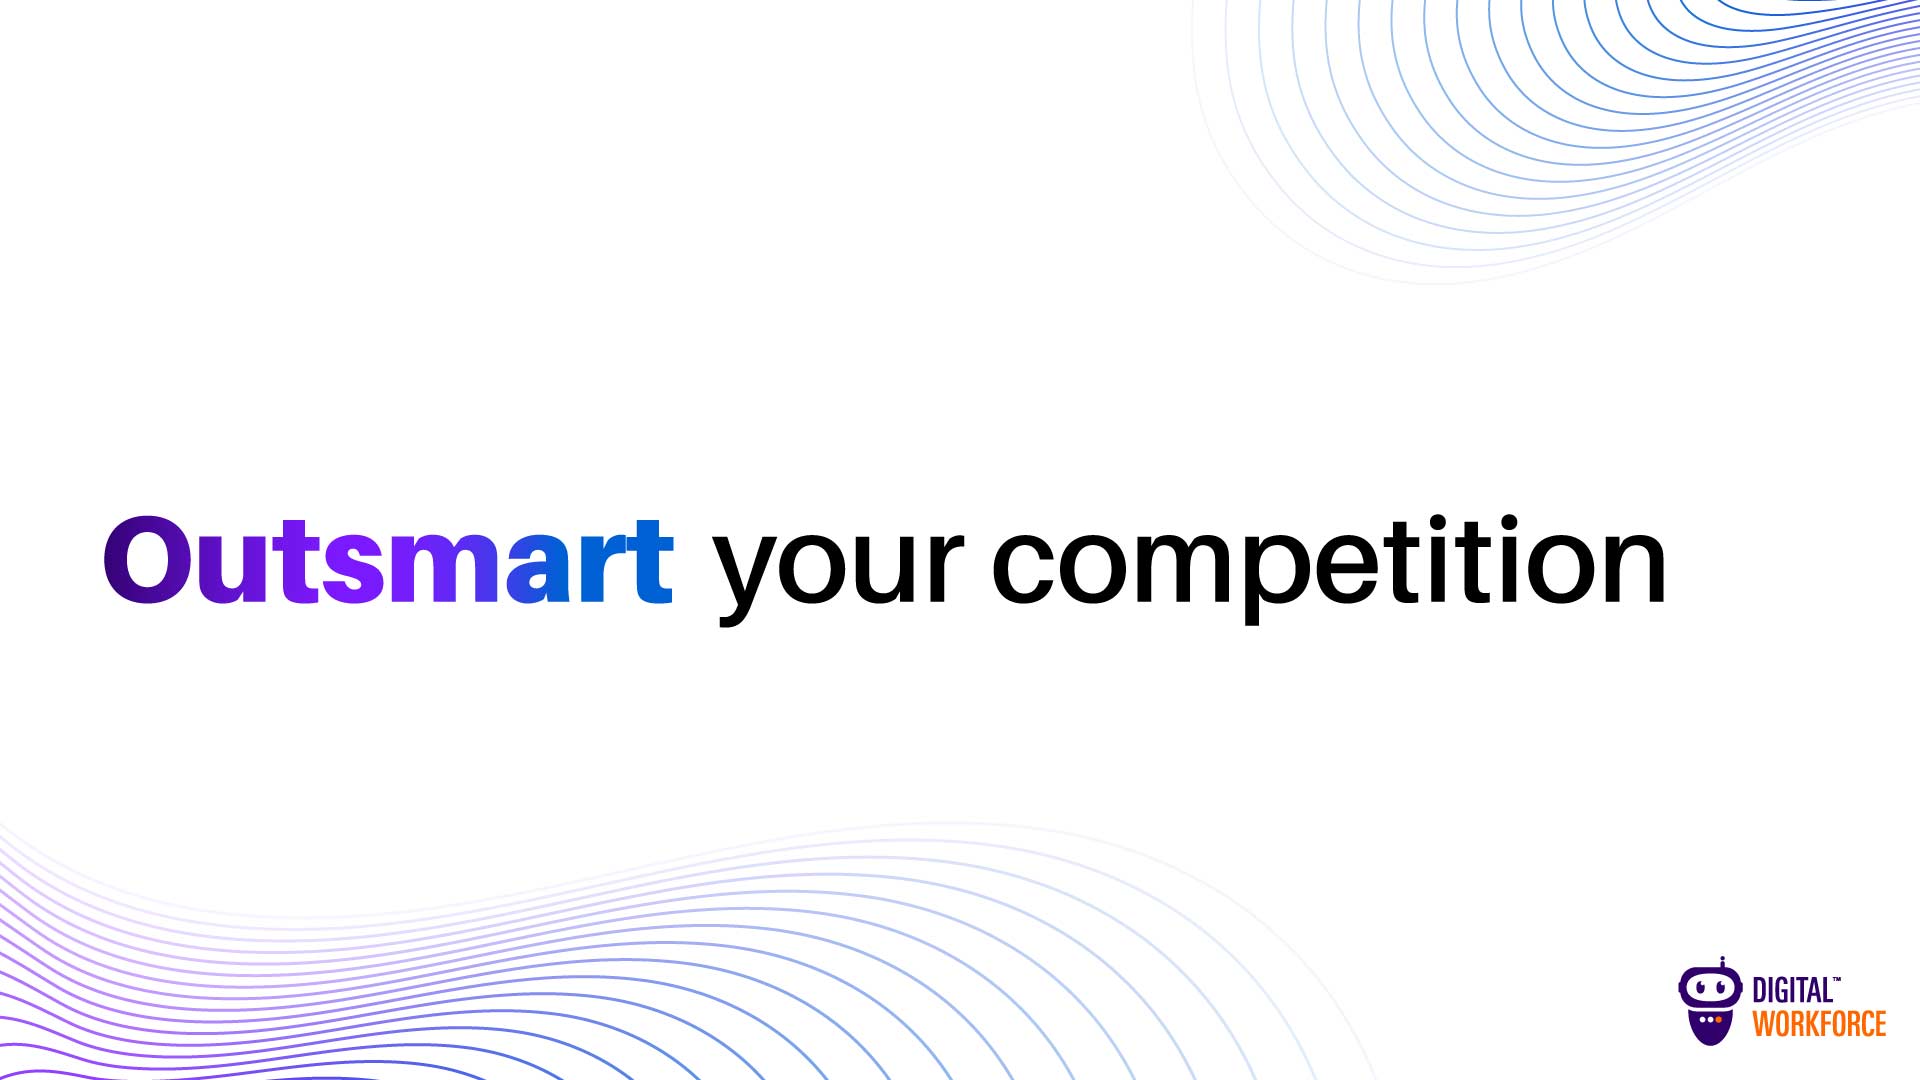 Outsmart-your-competition-002